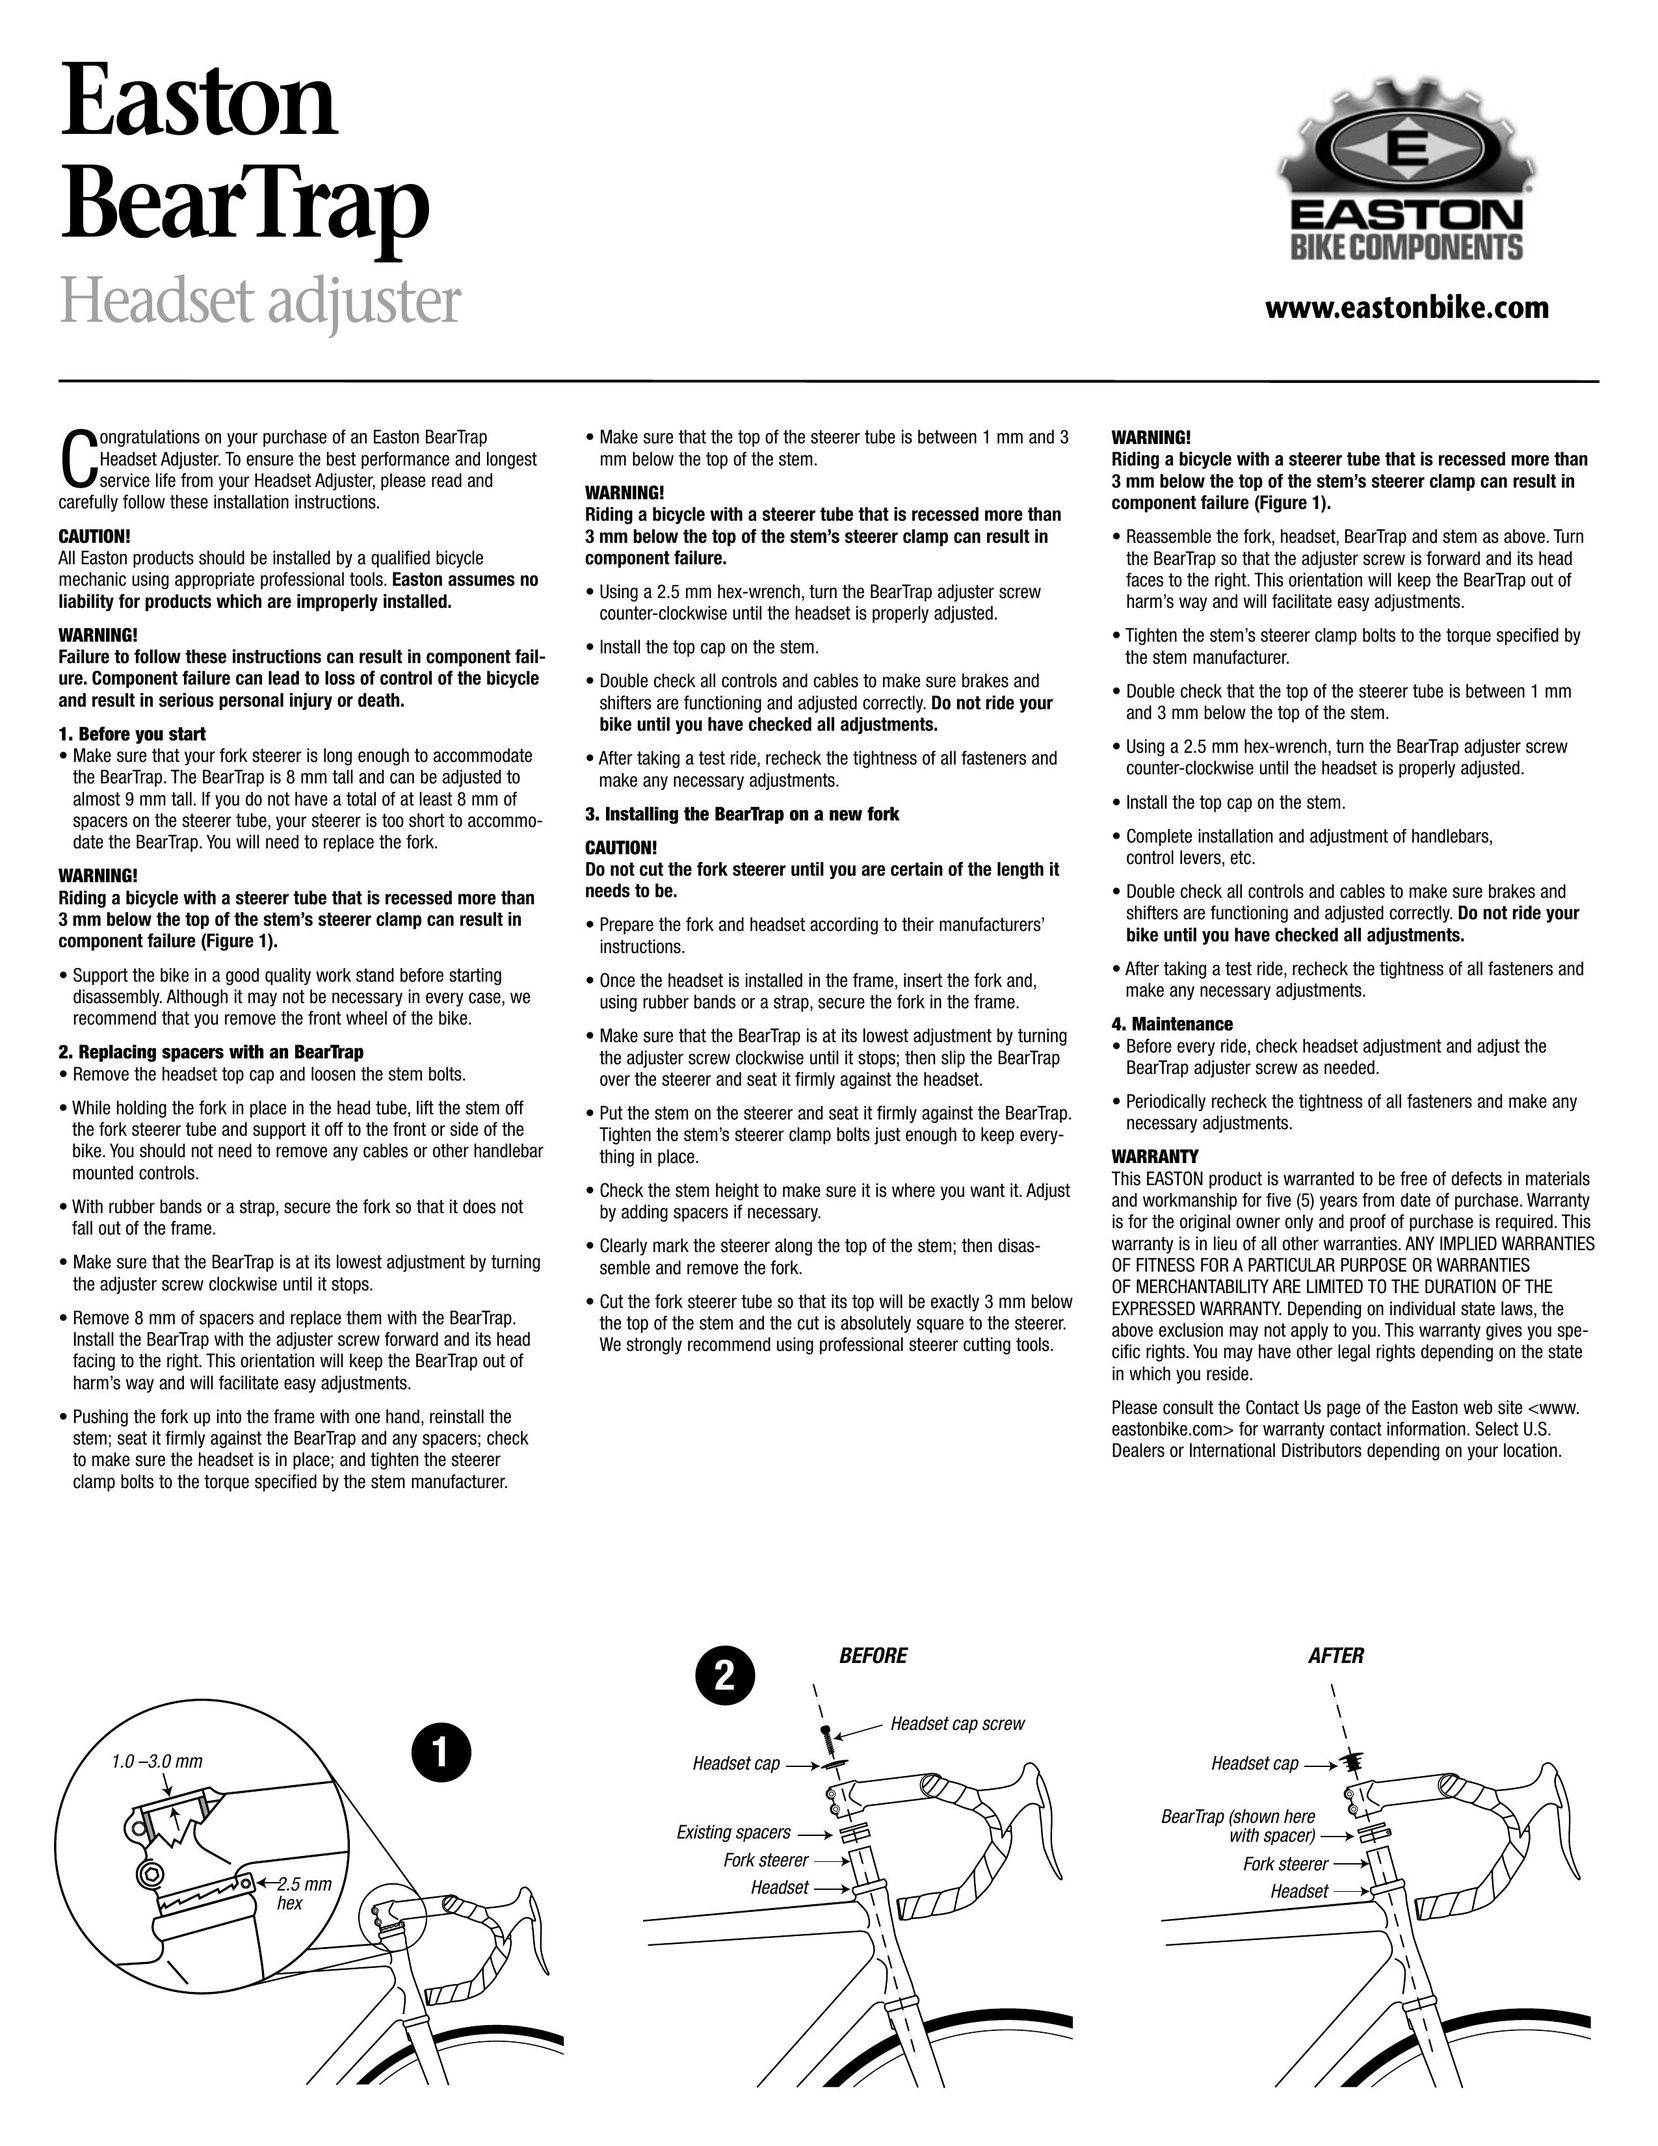 Easton Sports BearTrap Bicycle Accessories User Manual